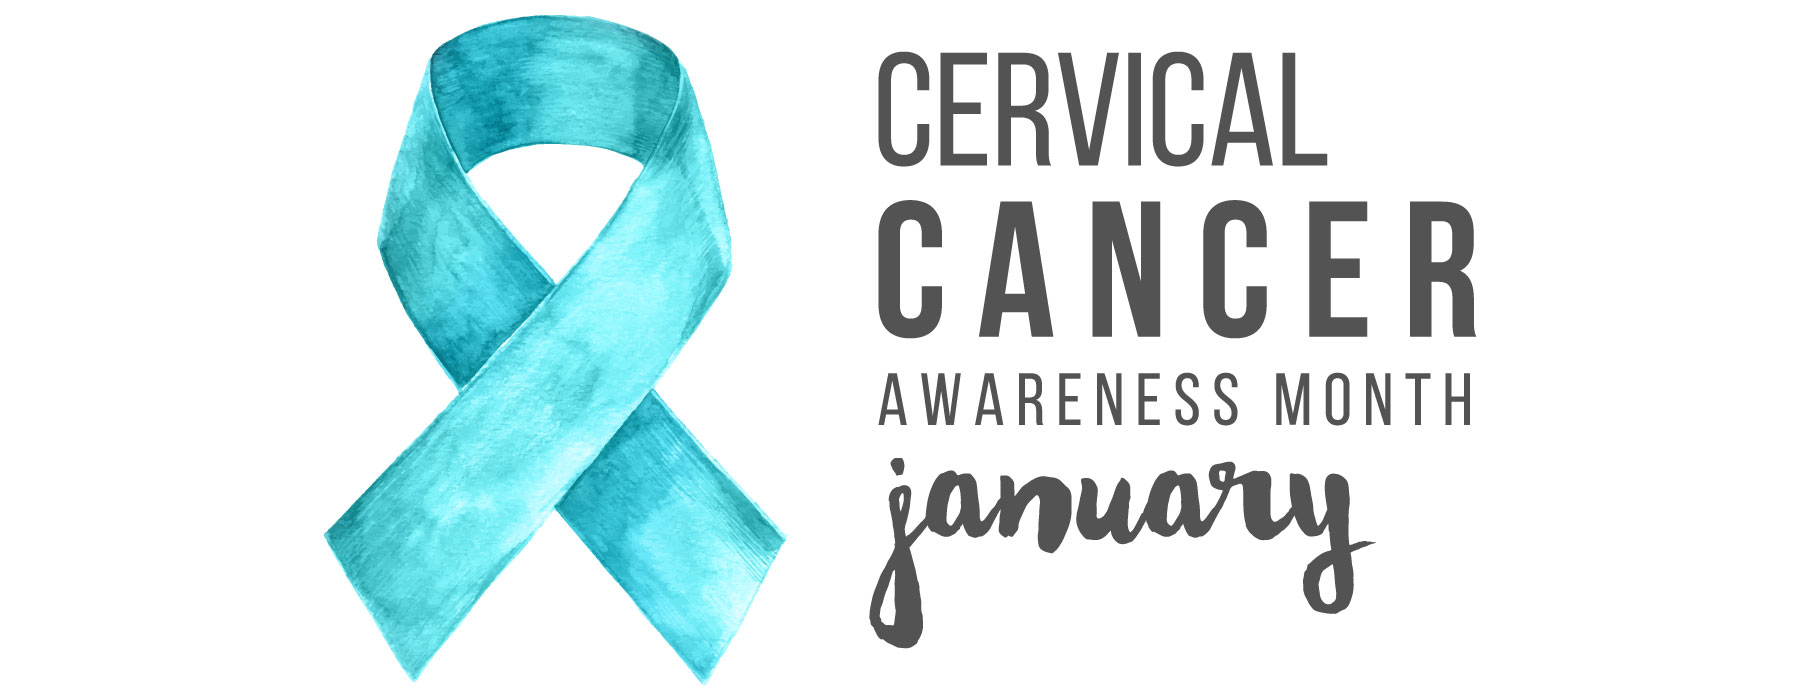 Banner picture pf a large ribbon. Banner says:
CERVIVAL CANCER
AWARENESS MONTH
January